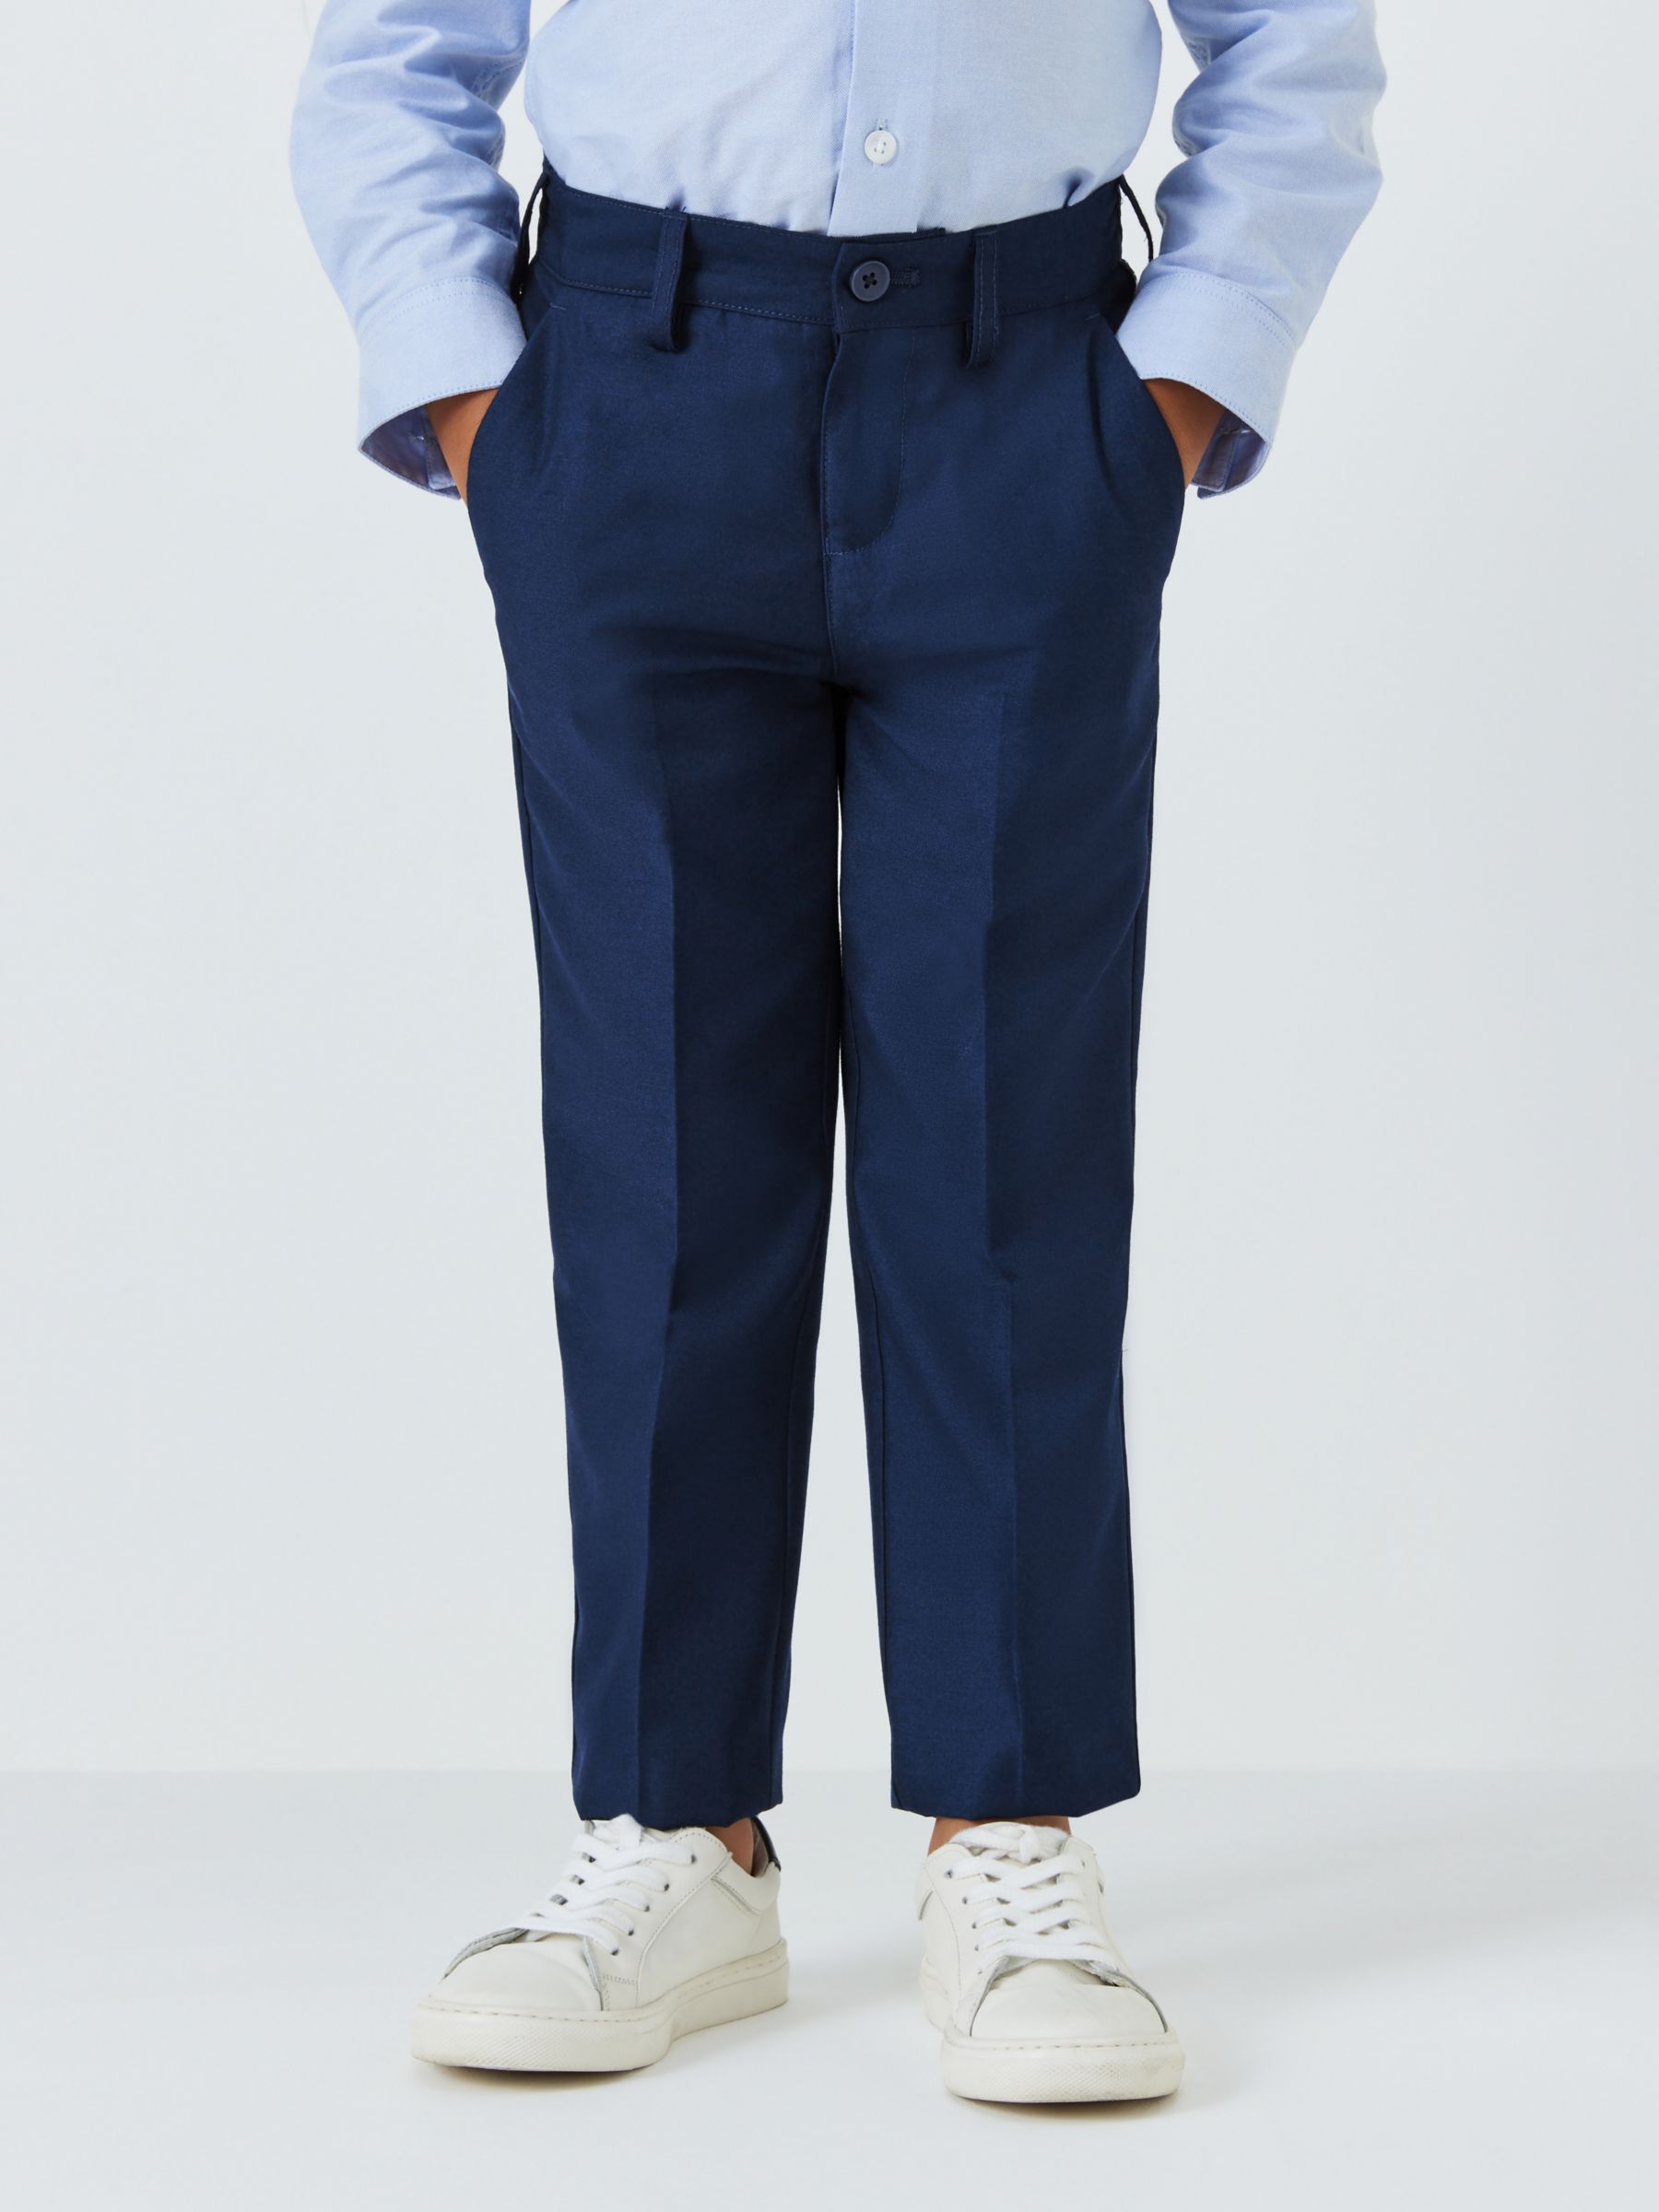 John Lewis Heirloom Collection Kids' Twill Suit Trousers, Blue at John ...